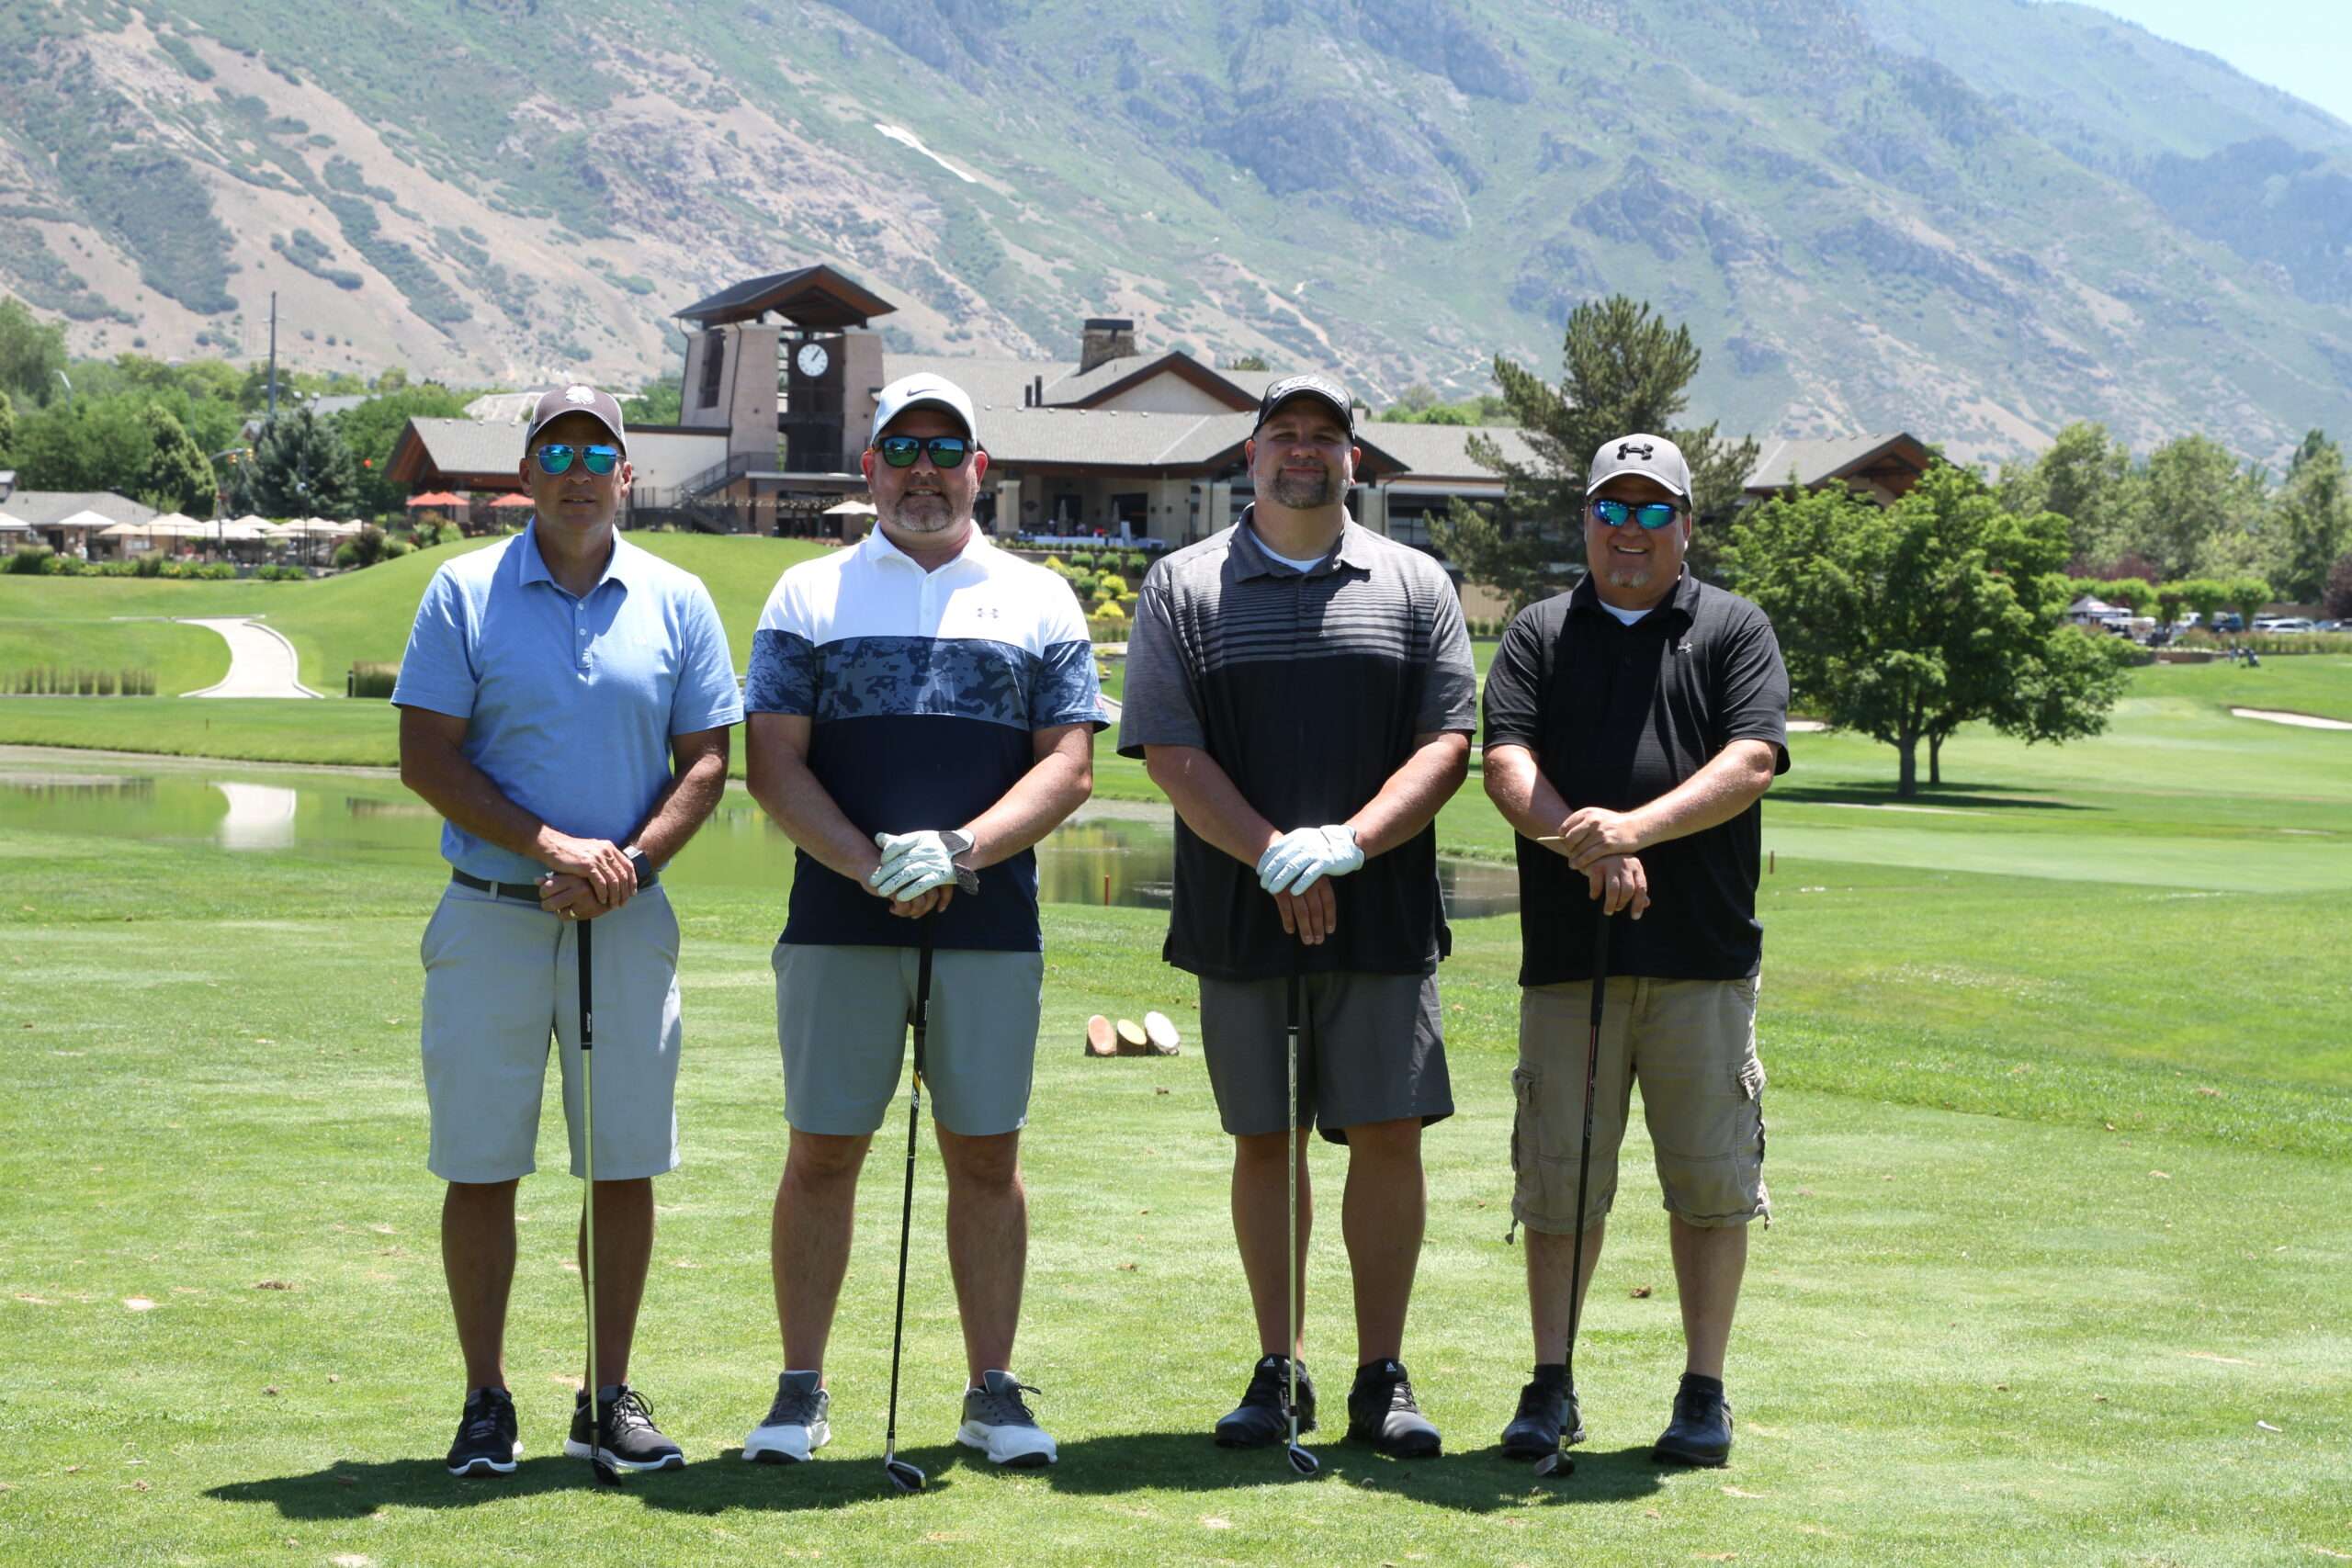 Participants in the golf tournament